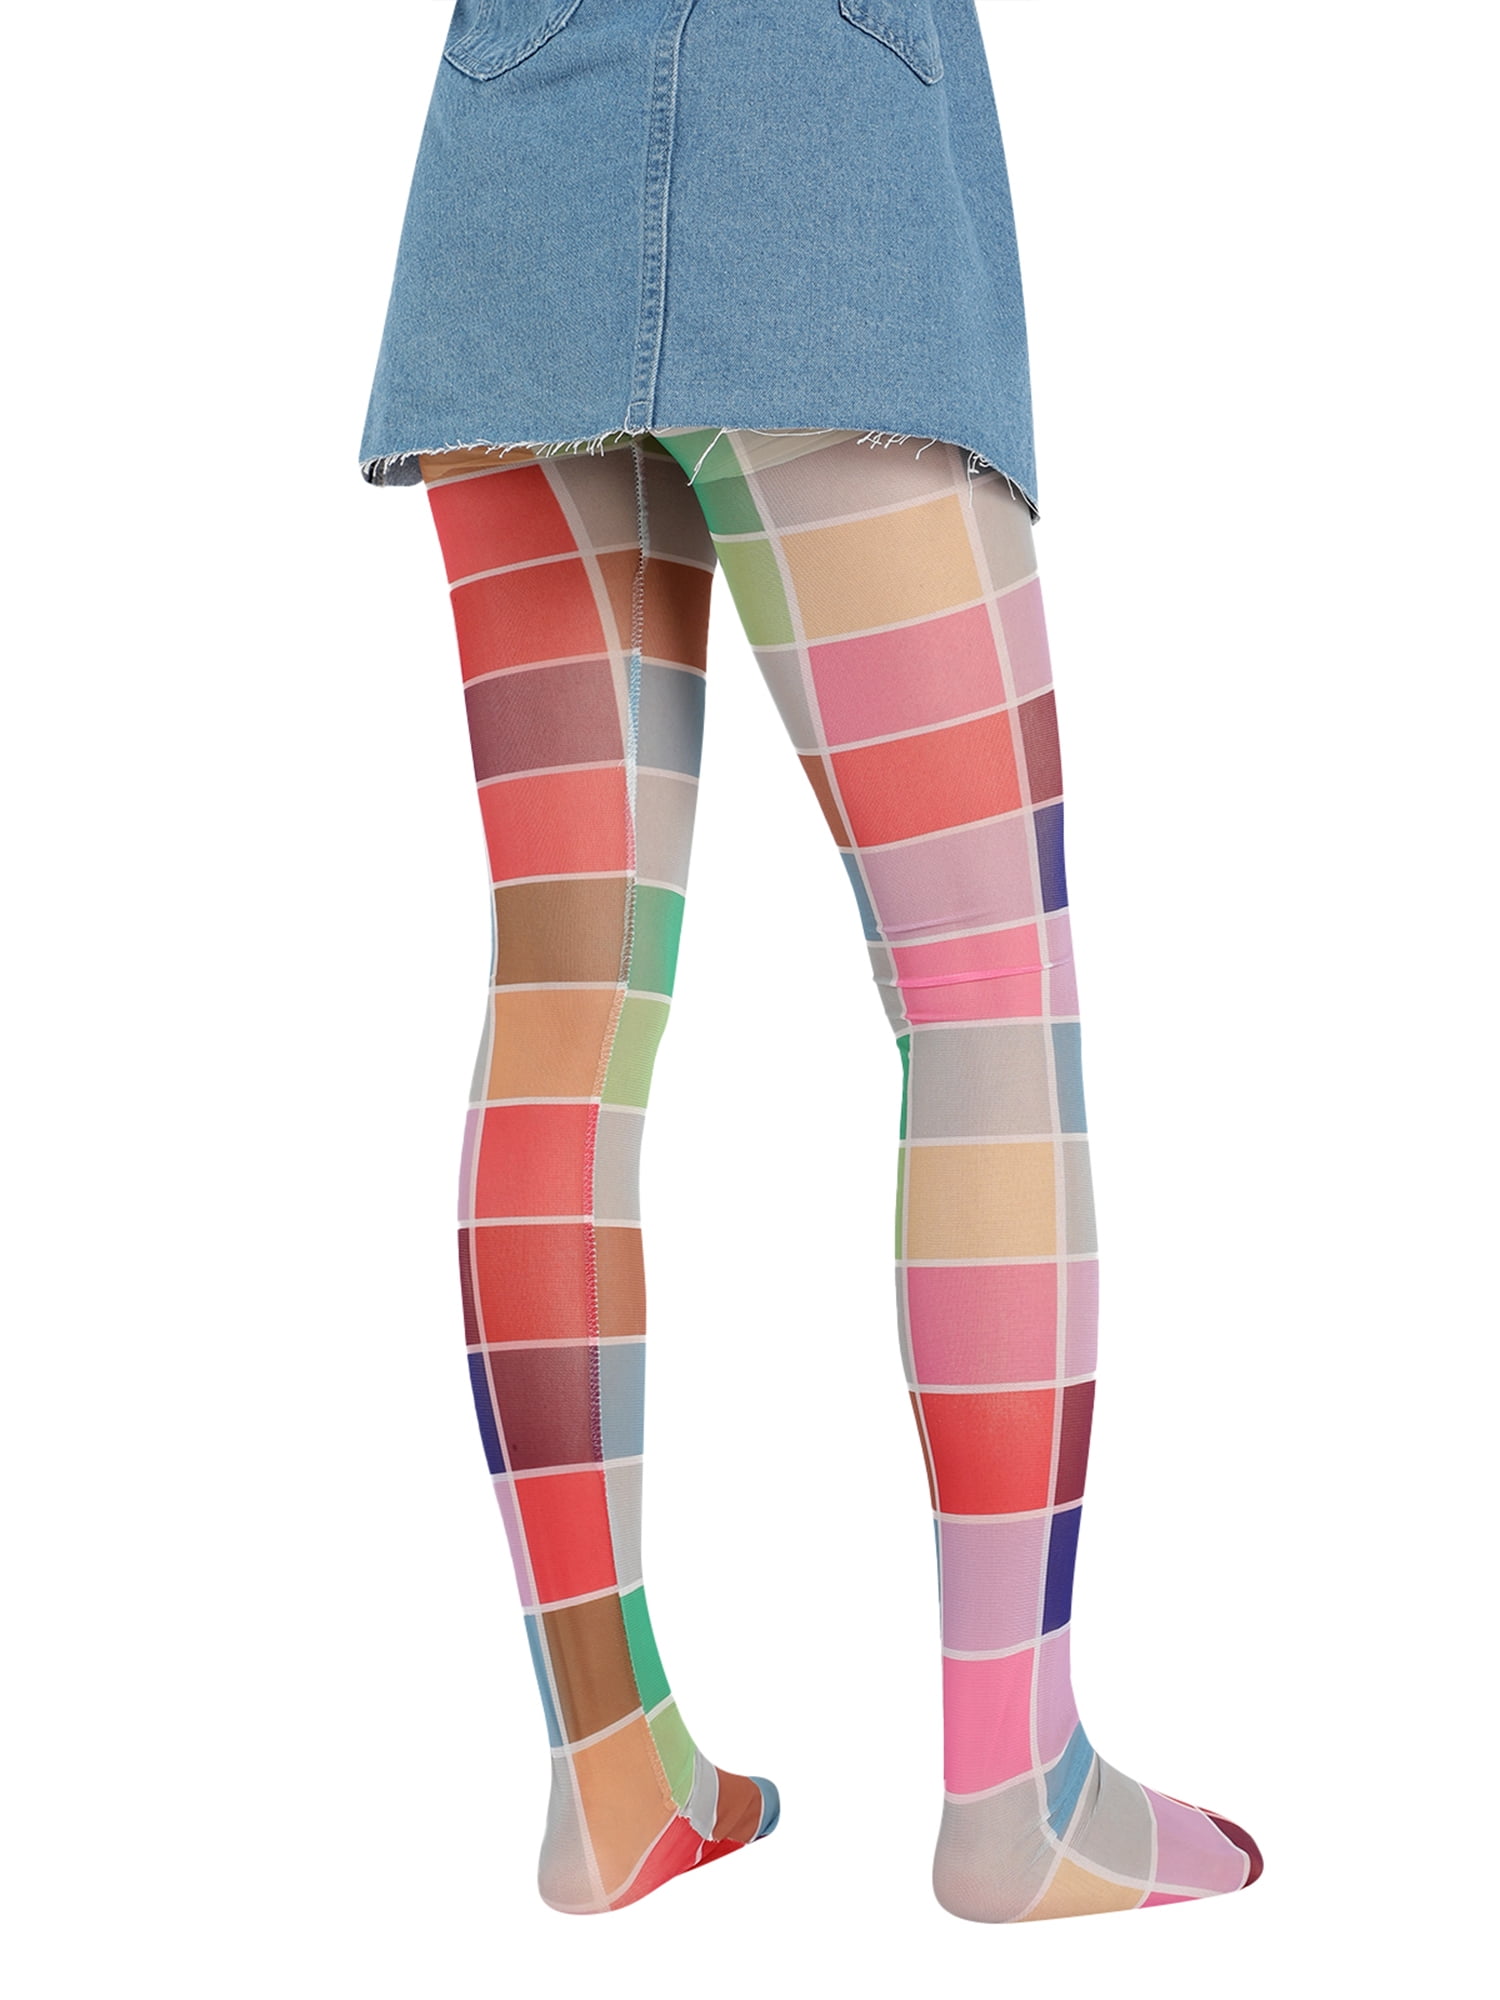 MACADEMIAN GIRL: NEON LACE DRESS  Fashion tights, Quirky fashion, Colored  tights outfit